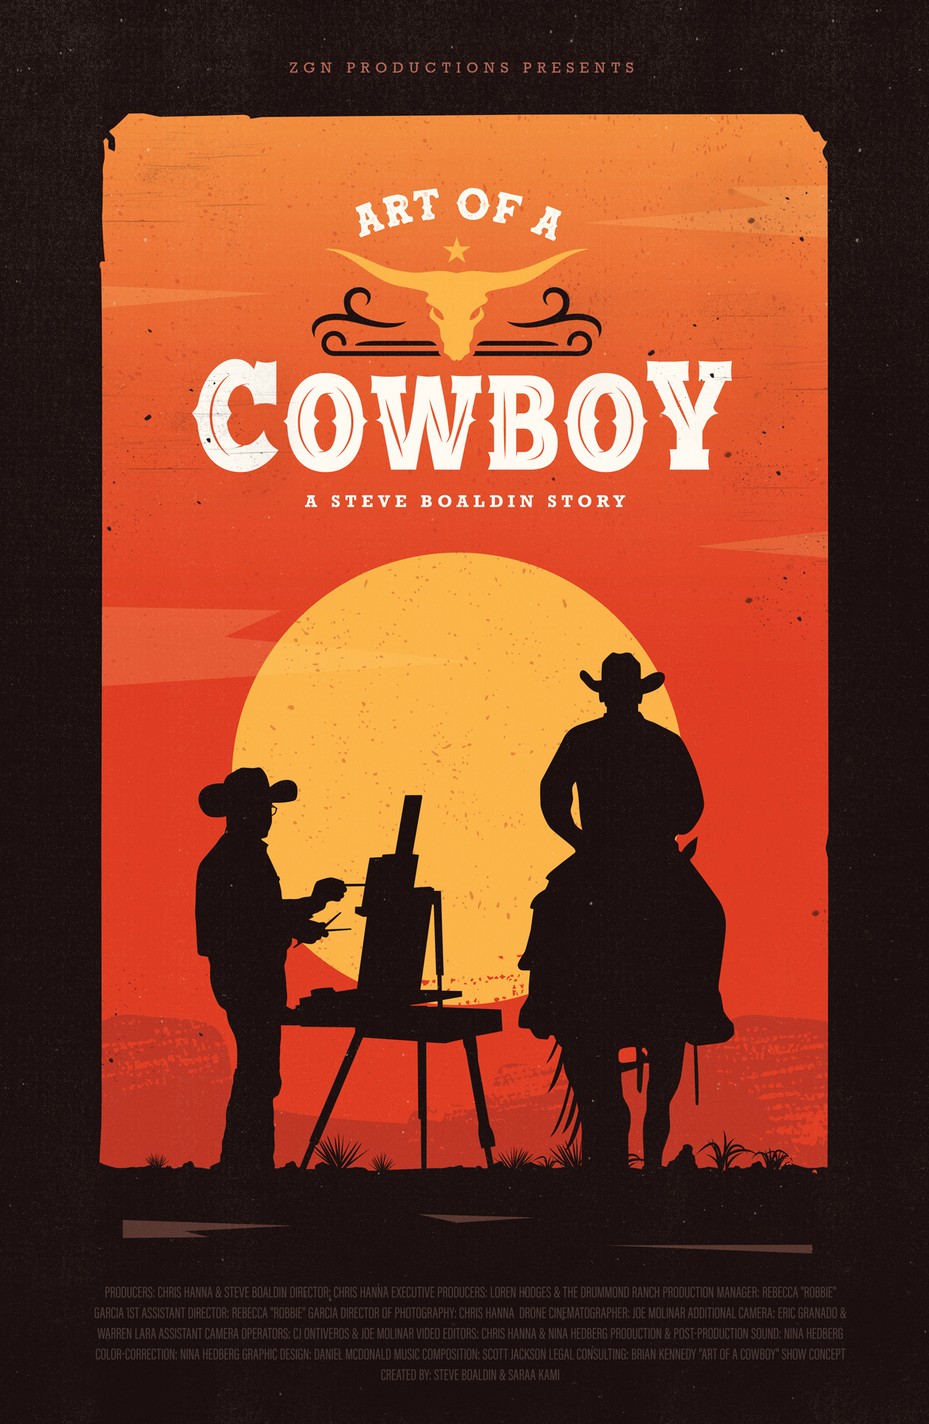 Documentary The Art of a Cowboy: A Steve Boaldin Story, based on the Award Winning series, now on Amazon and PBS